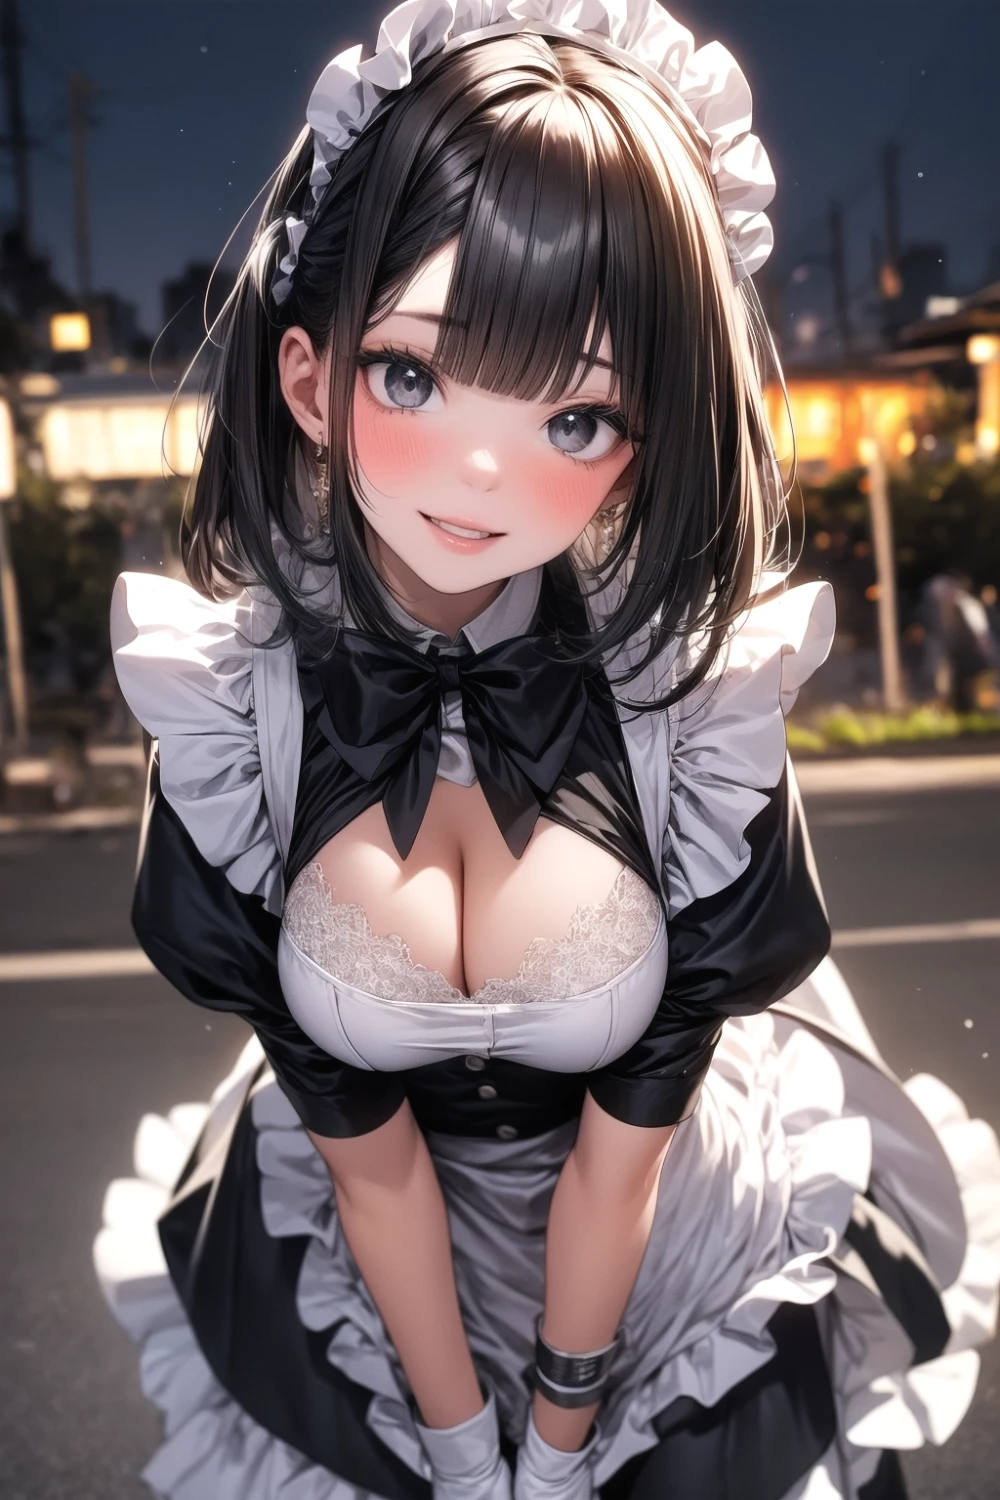 cleavage-anime-style-all-ages-3